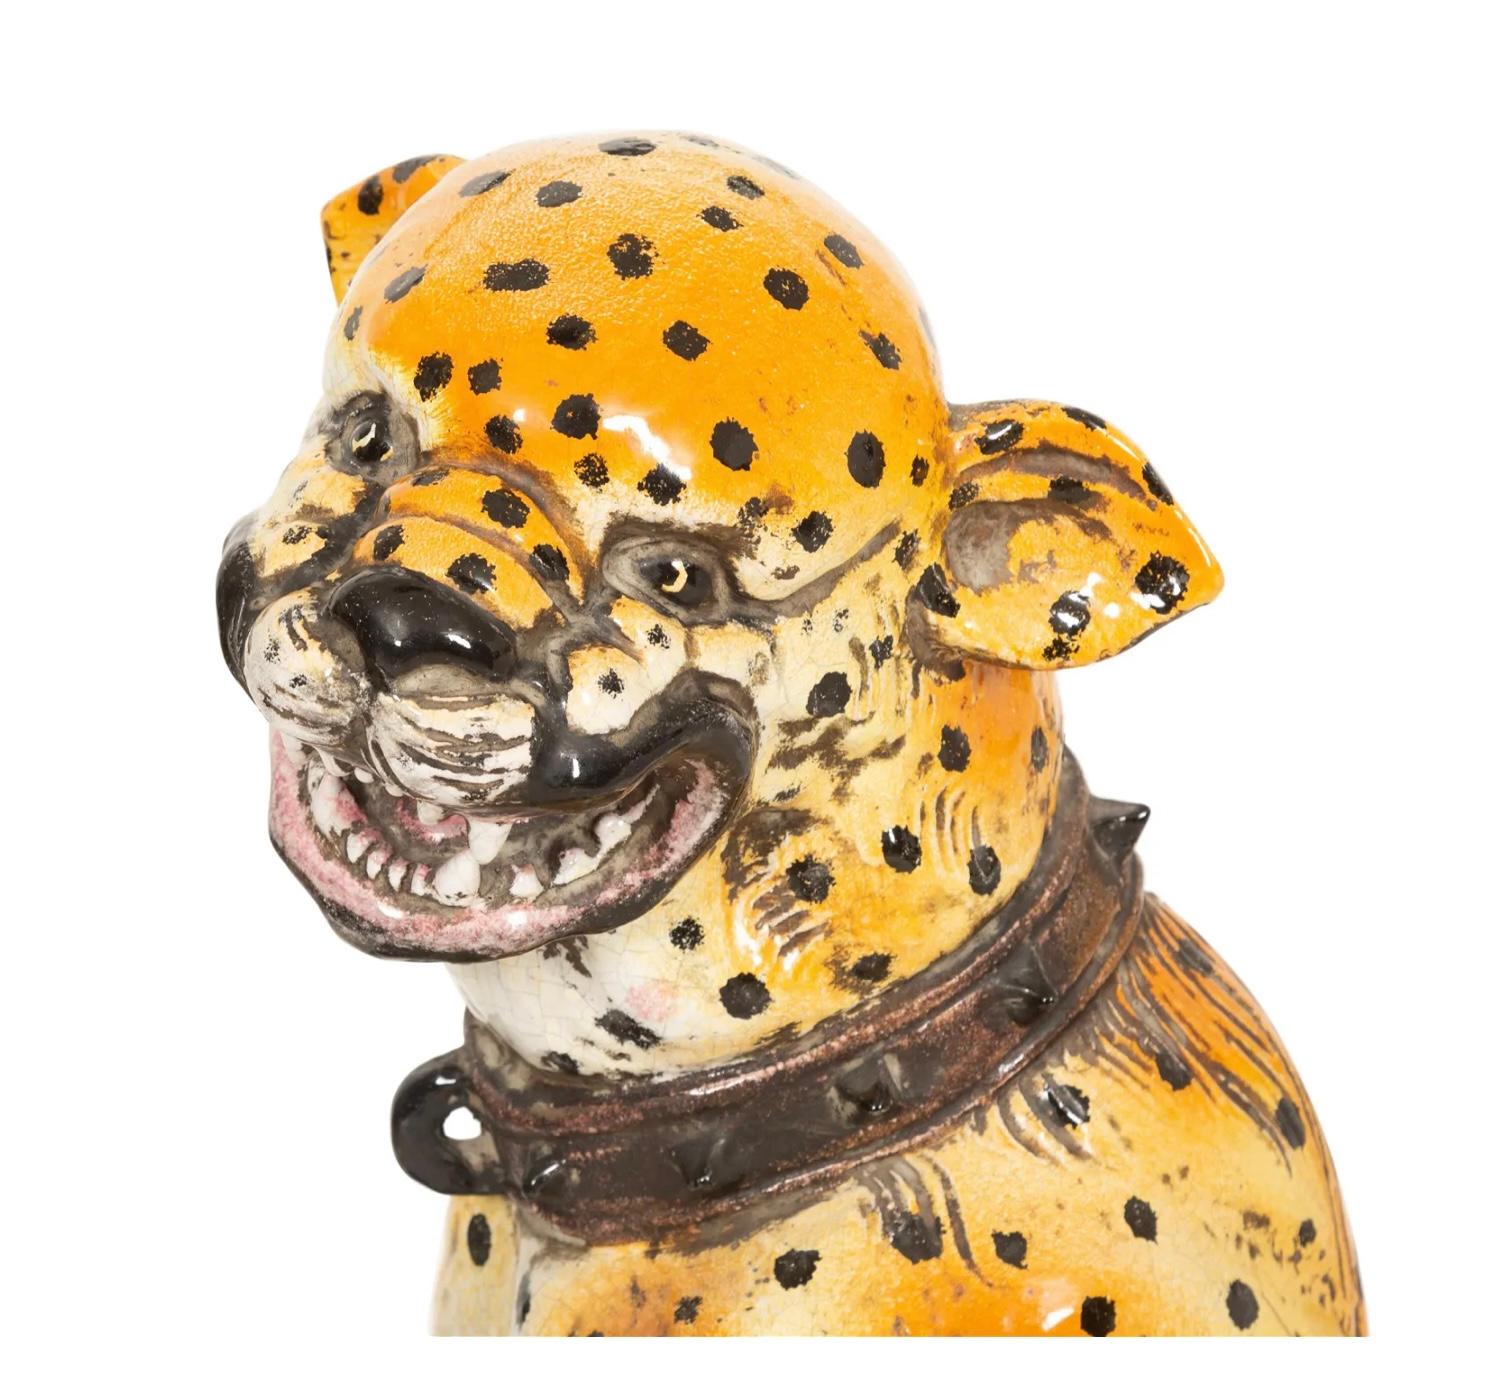 Magnificent early 20th Century Italian Glazed Terracotta Seated Leopard. Vivid colors of orange and yellow with dark brown spots on bright green pillow. Great natural facial expression with open mouth showing teeth. 
